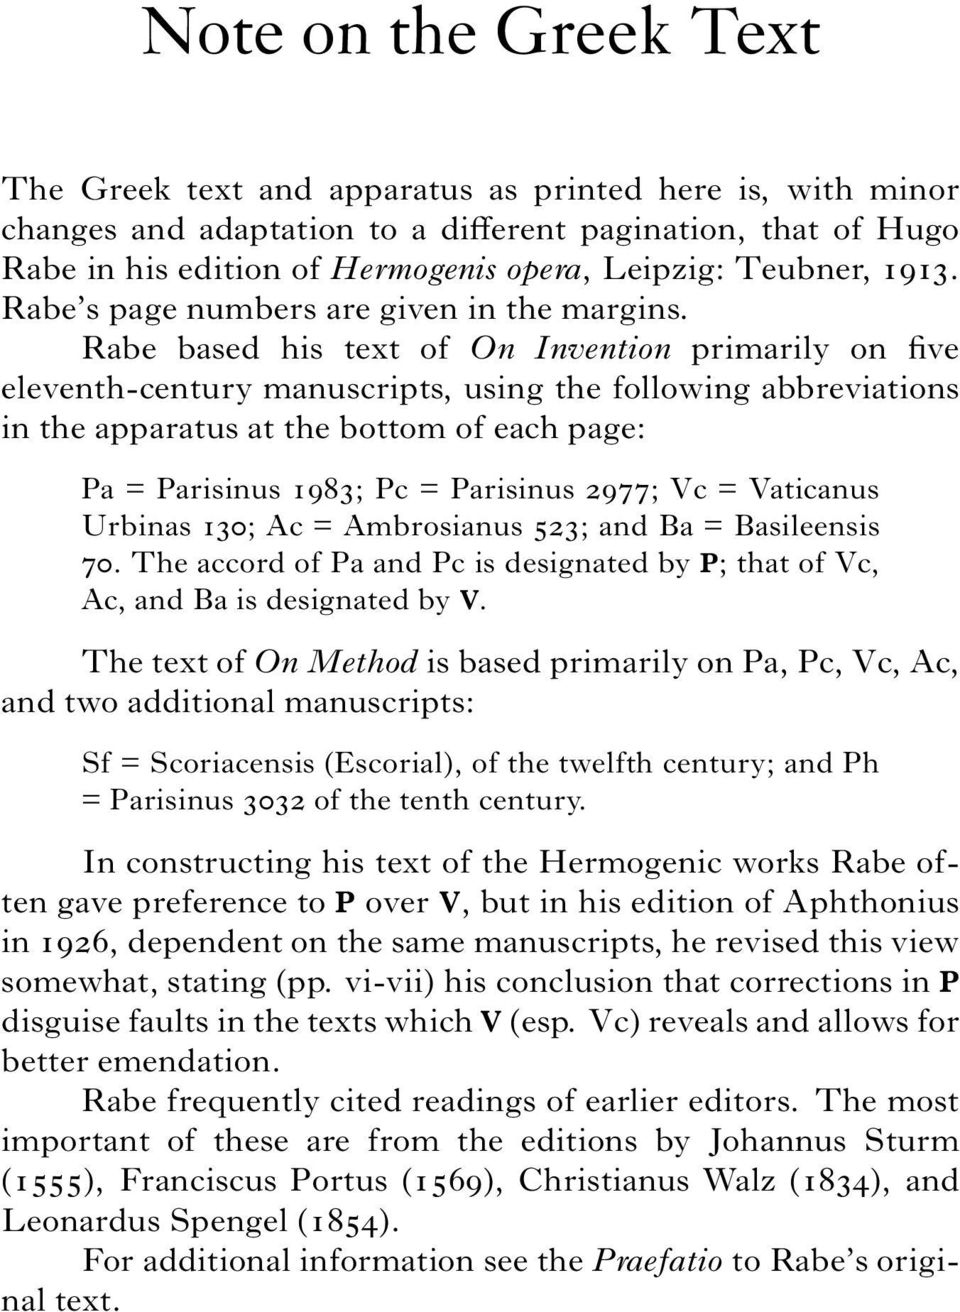 Rabe based his text of On Invention primarily on five eleventh-century manuscripts, using the following abbreviations in the apparatus at the bottom of each page: Pa = Parisinus 1983; Pc = Parisinus